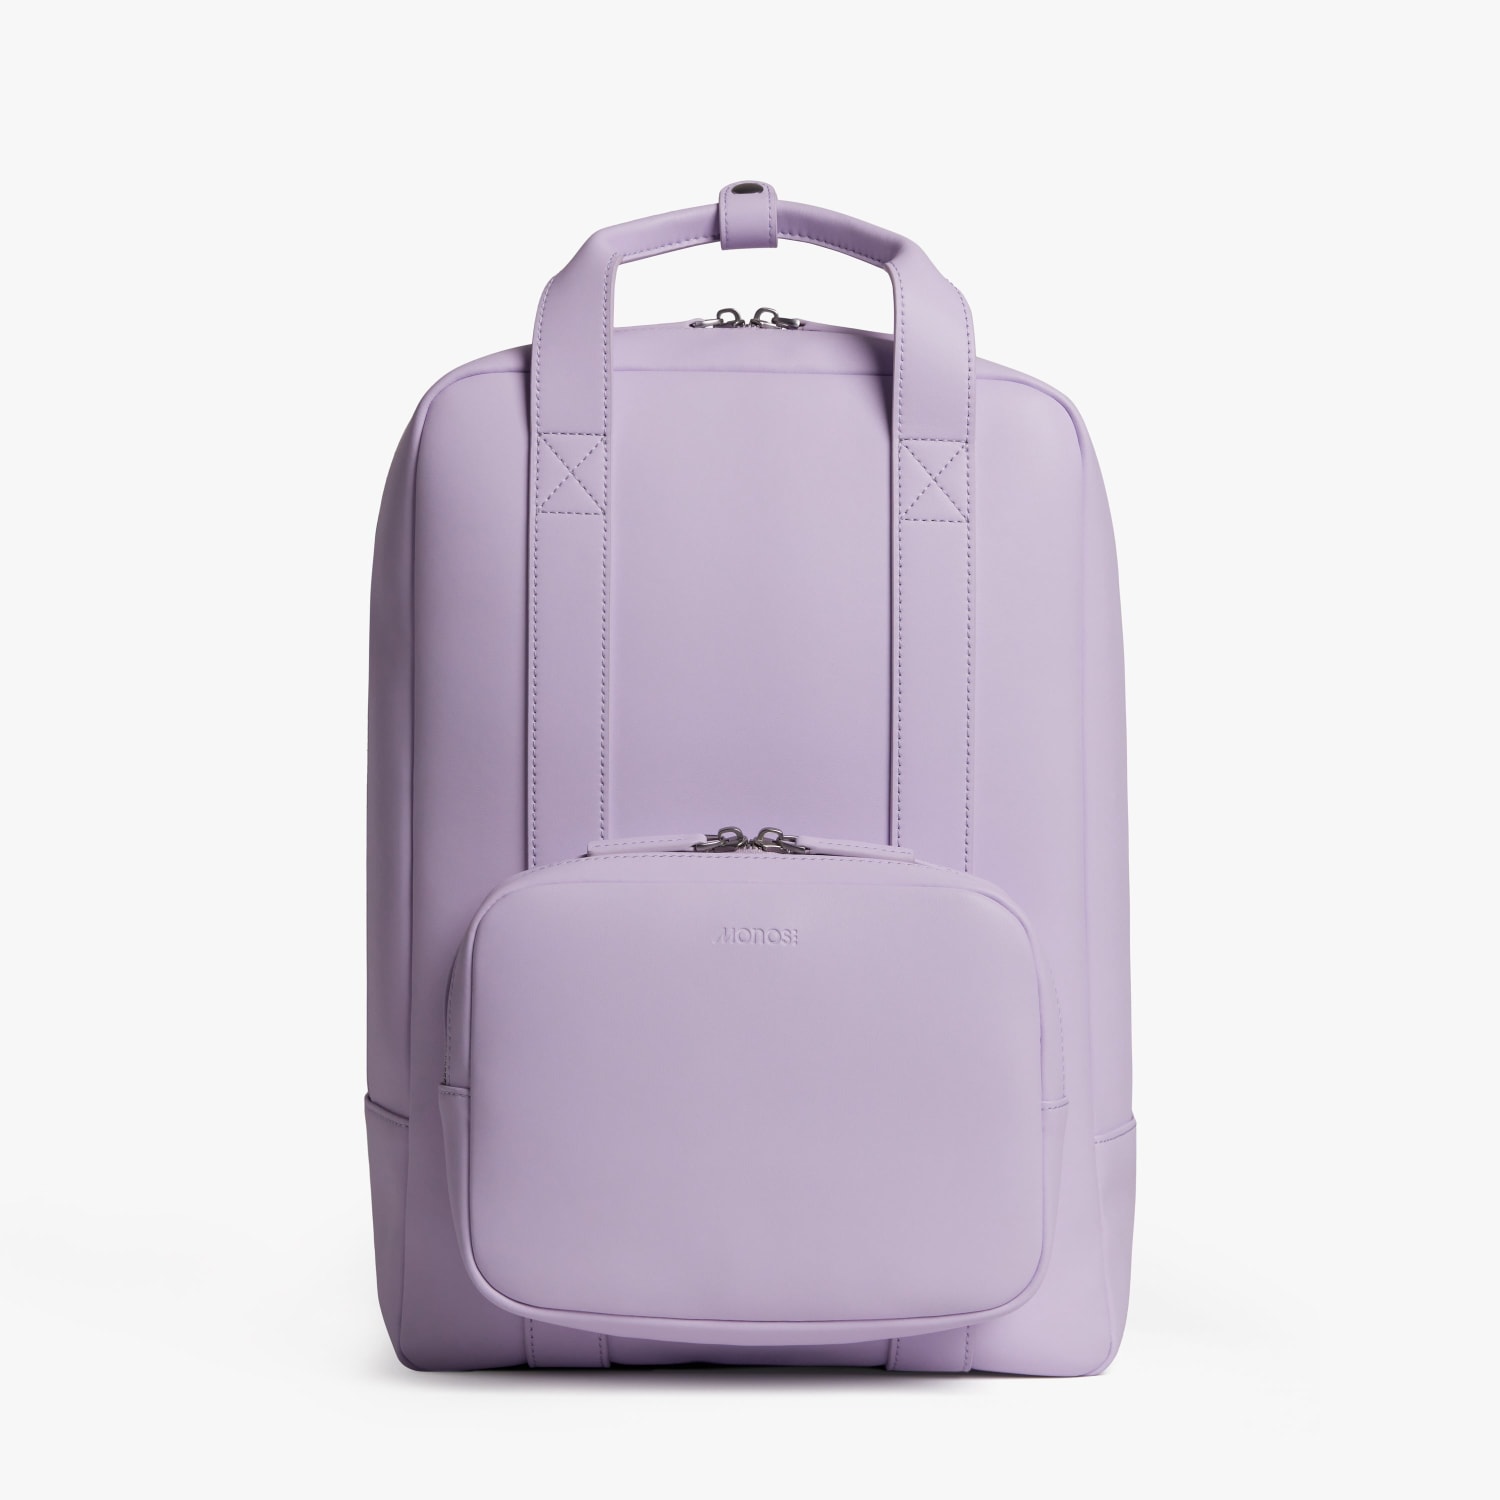 16 Best Laptop Bags for Women, According to ELLE Editors